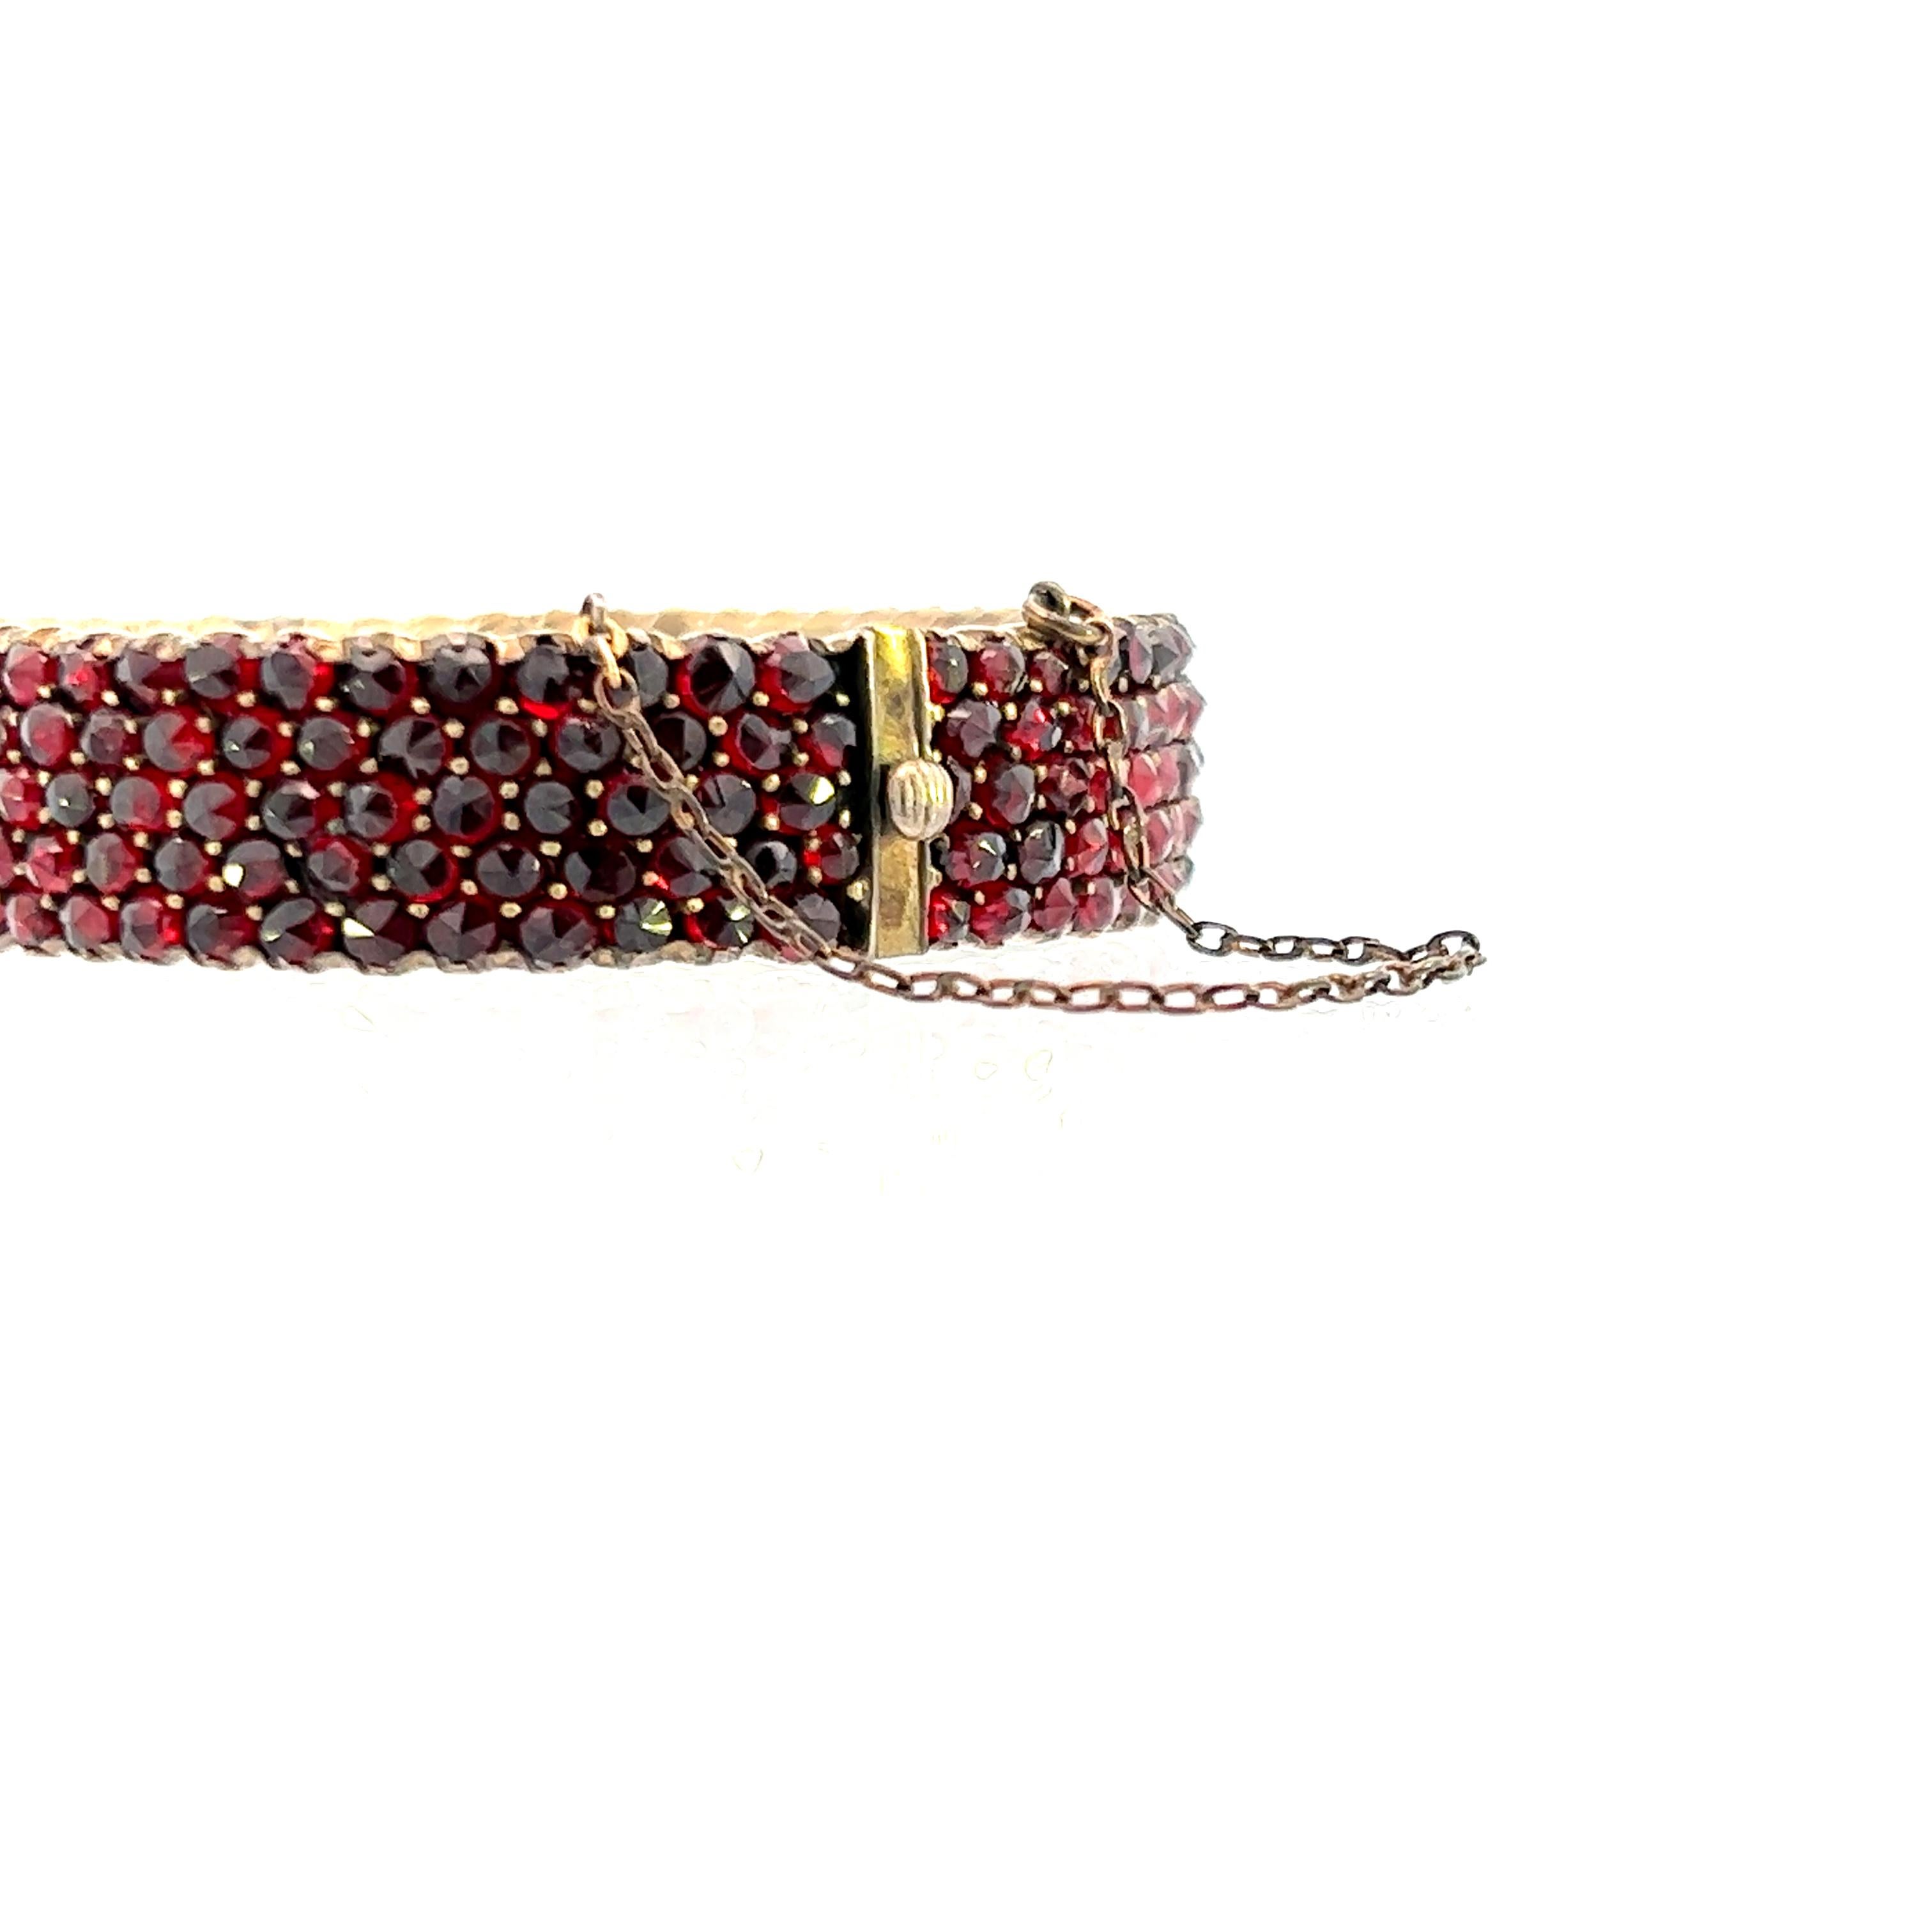 This 1880 Victorian bangle bracelet is gold filled and covered in beautiful garnet. The bangle contains 279 round cut garnets around the full exterior of the bracelet, except for the clasp. The bangle also has a a chain connecting both ends of the